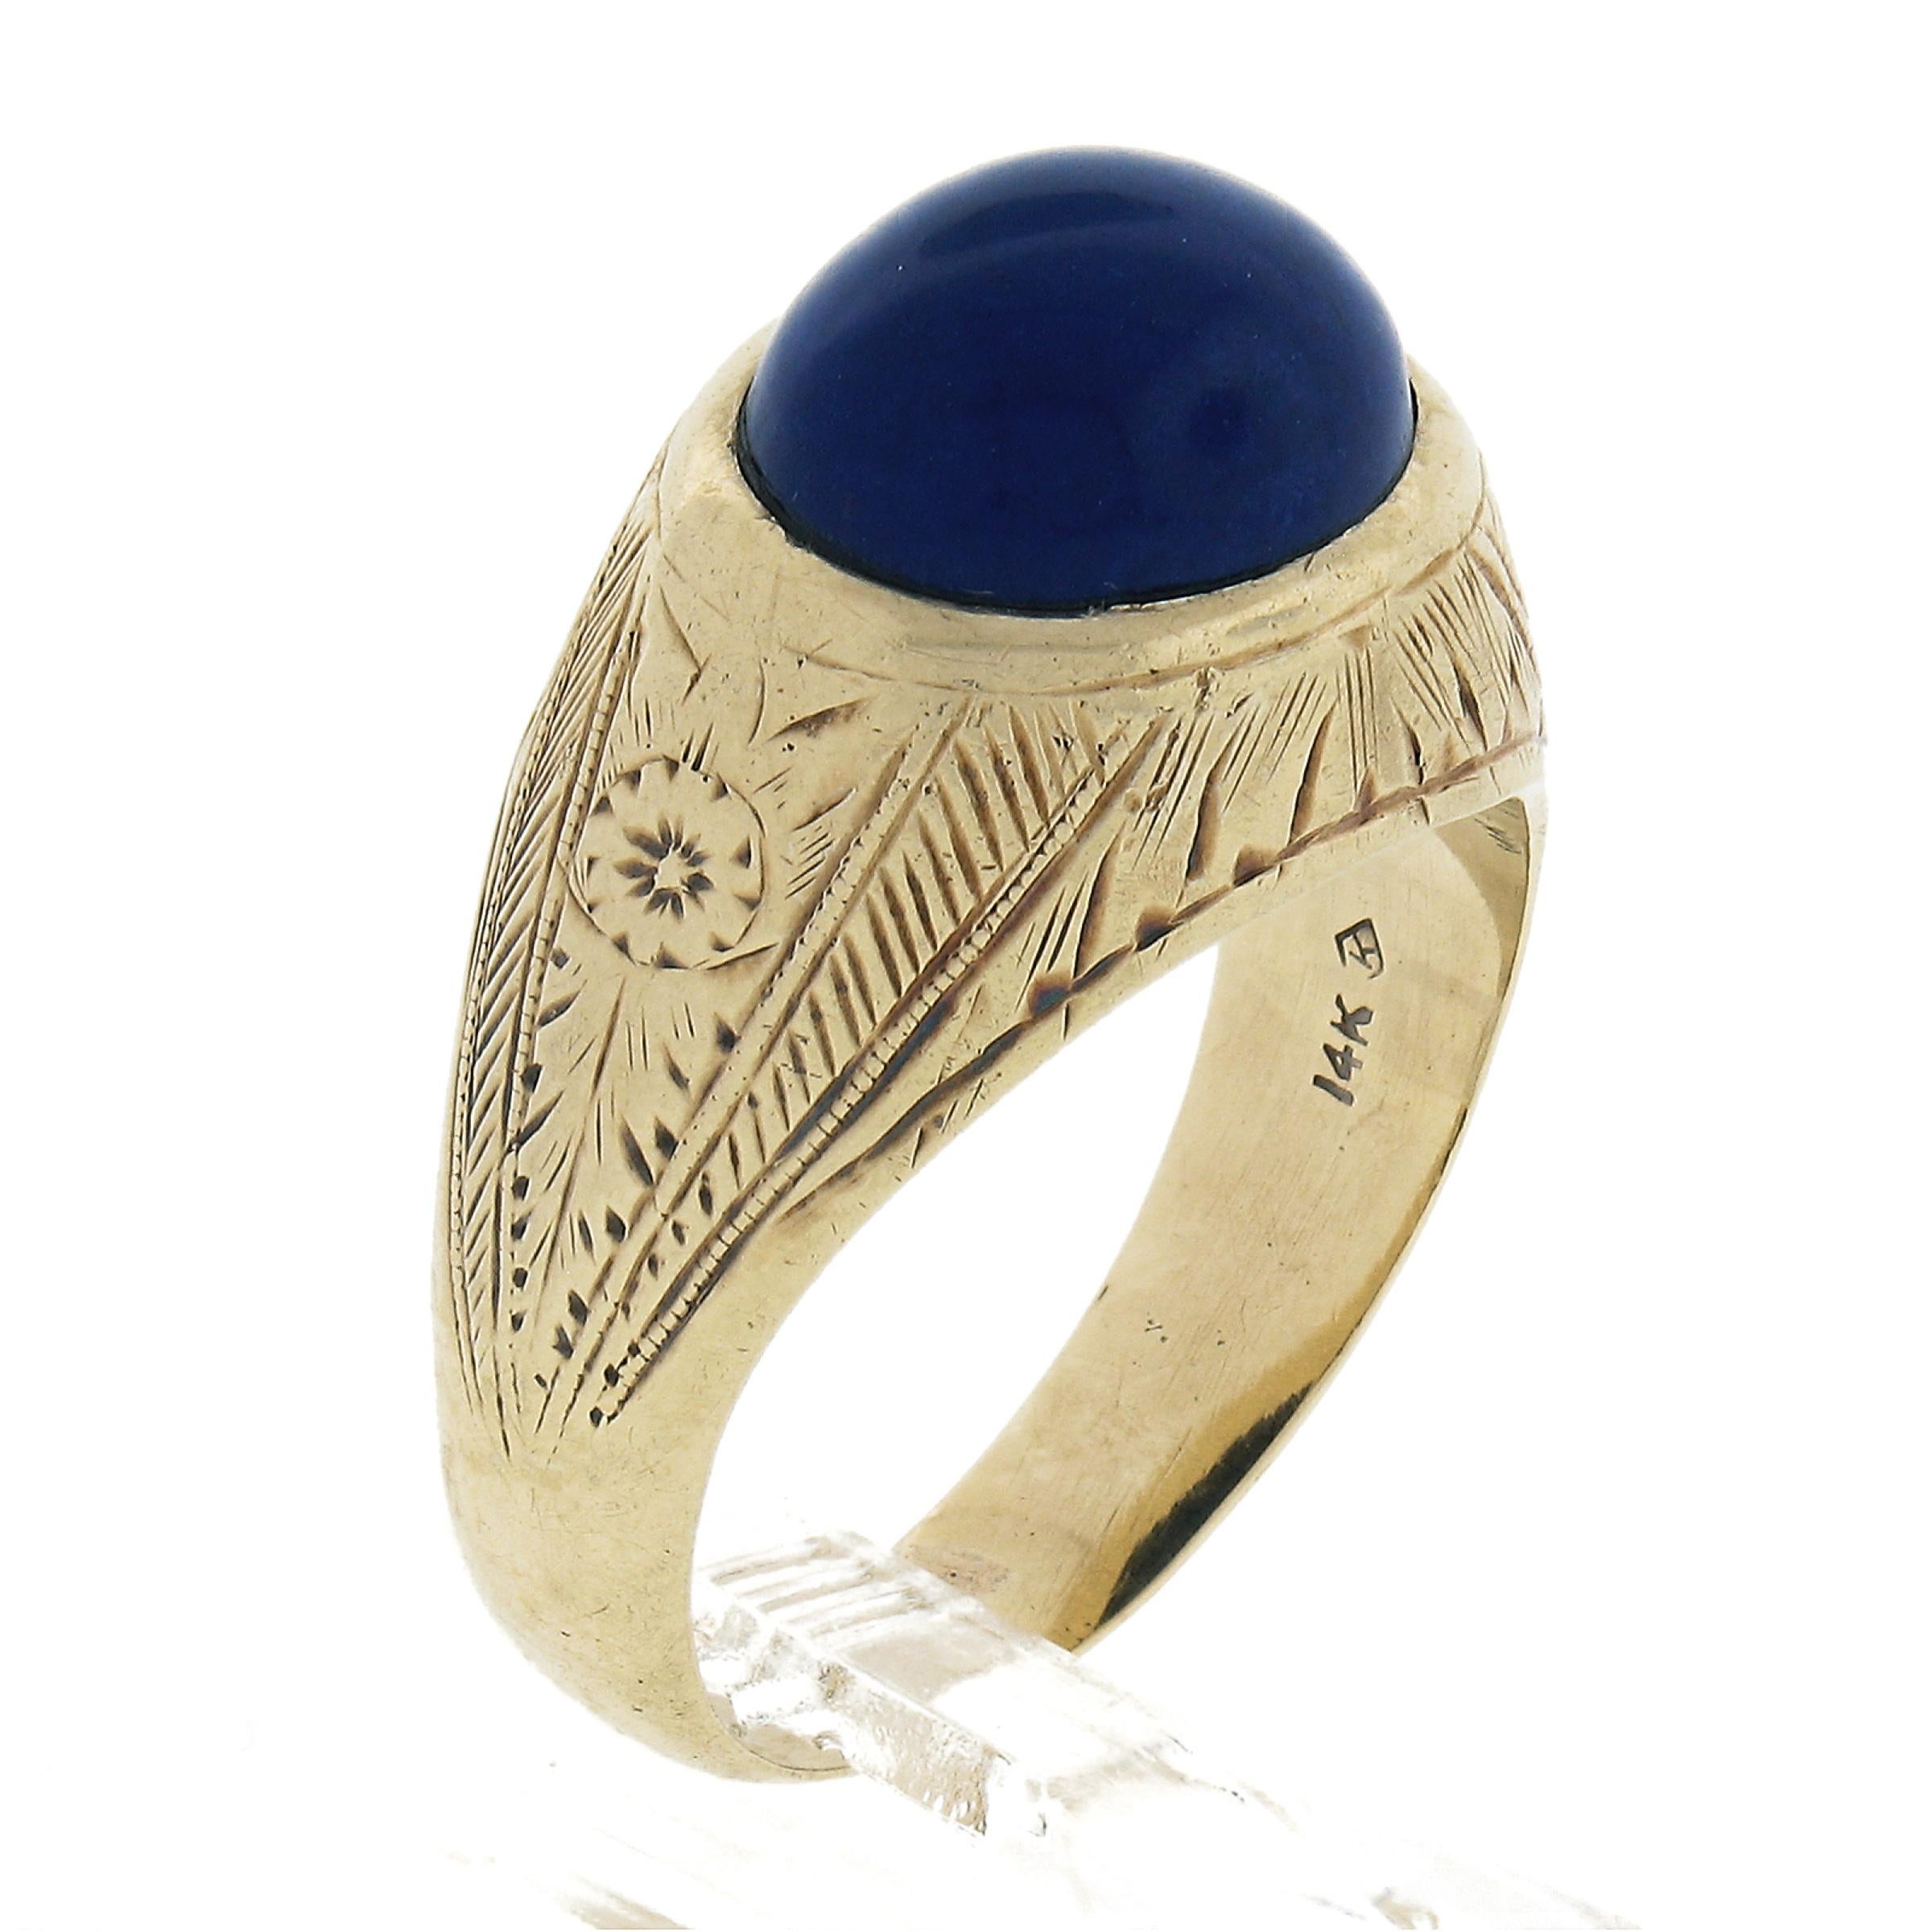 Antique Men's 14k Yellow Gold Oval Cabochon Bezel Lapis Hand Engraved Work Ring 3